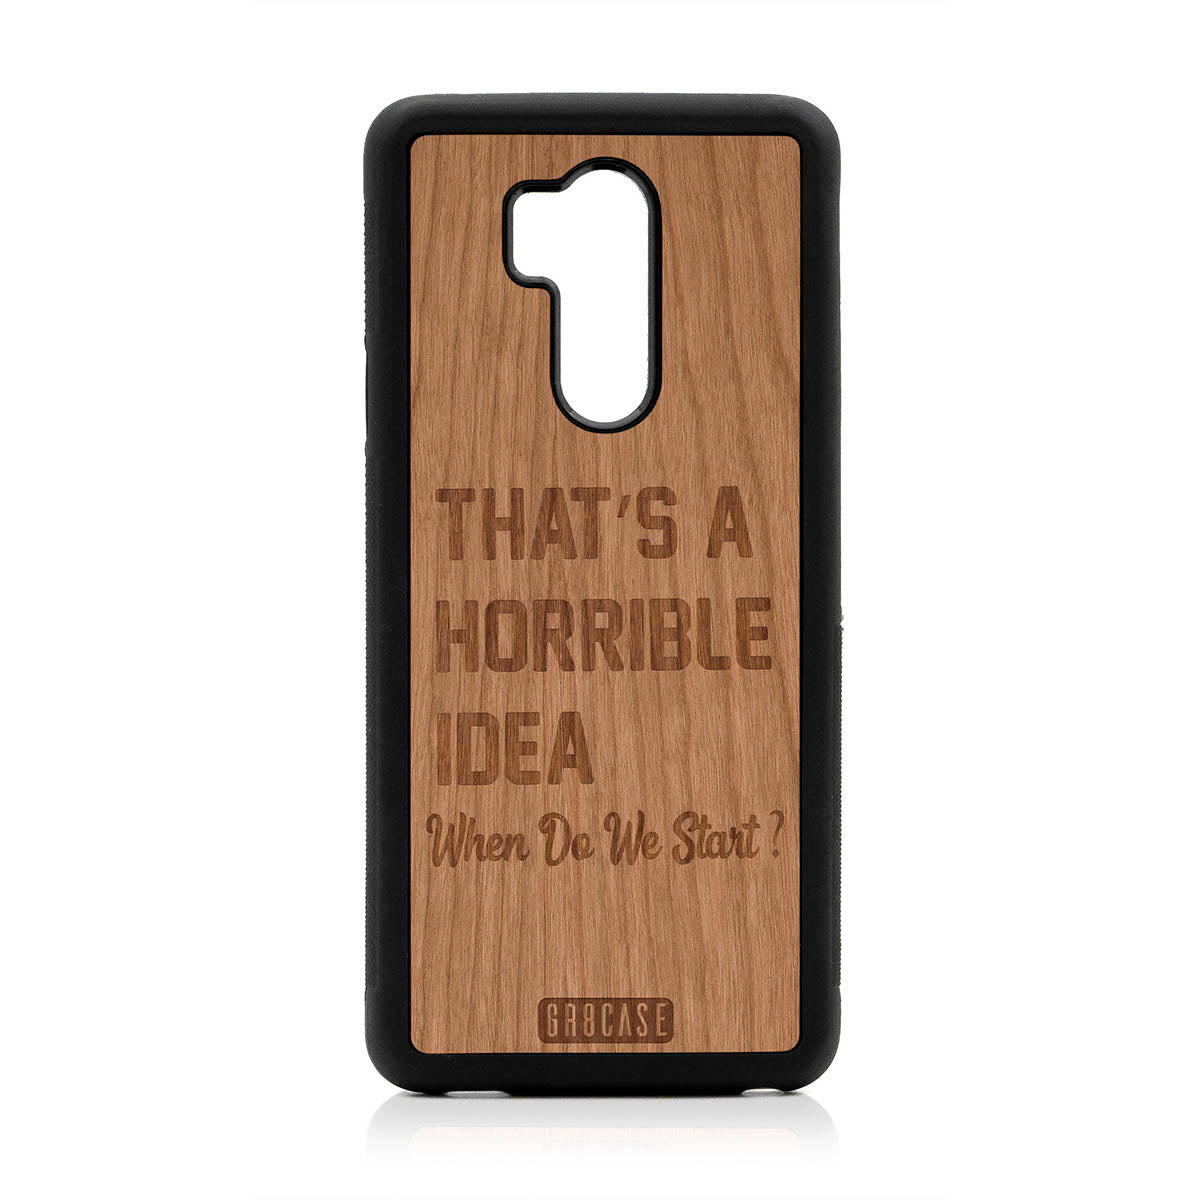 That's A Horrible Idea When Do We Start? Design Wood Case For LG G7 ThinQ